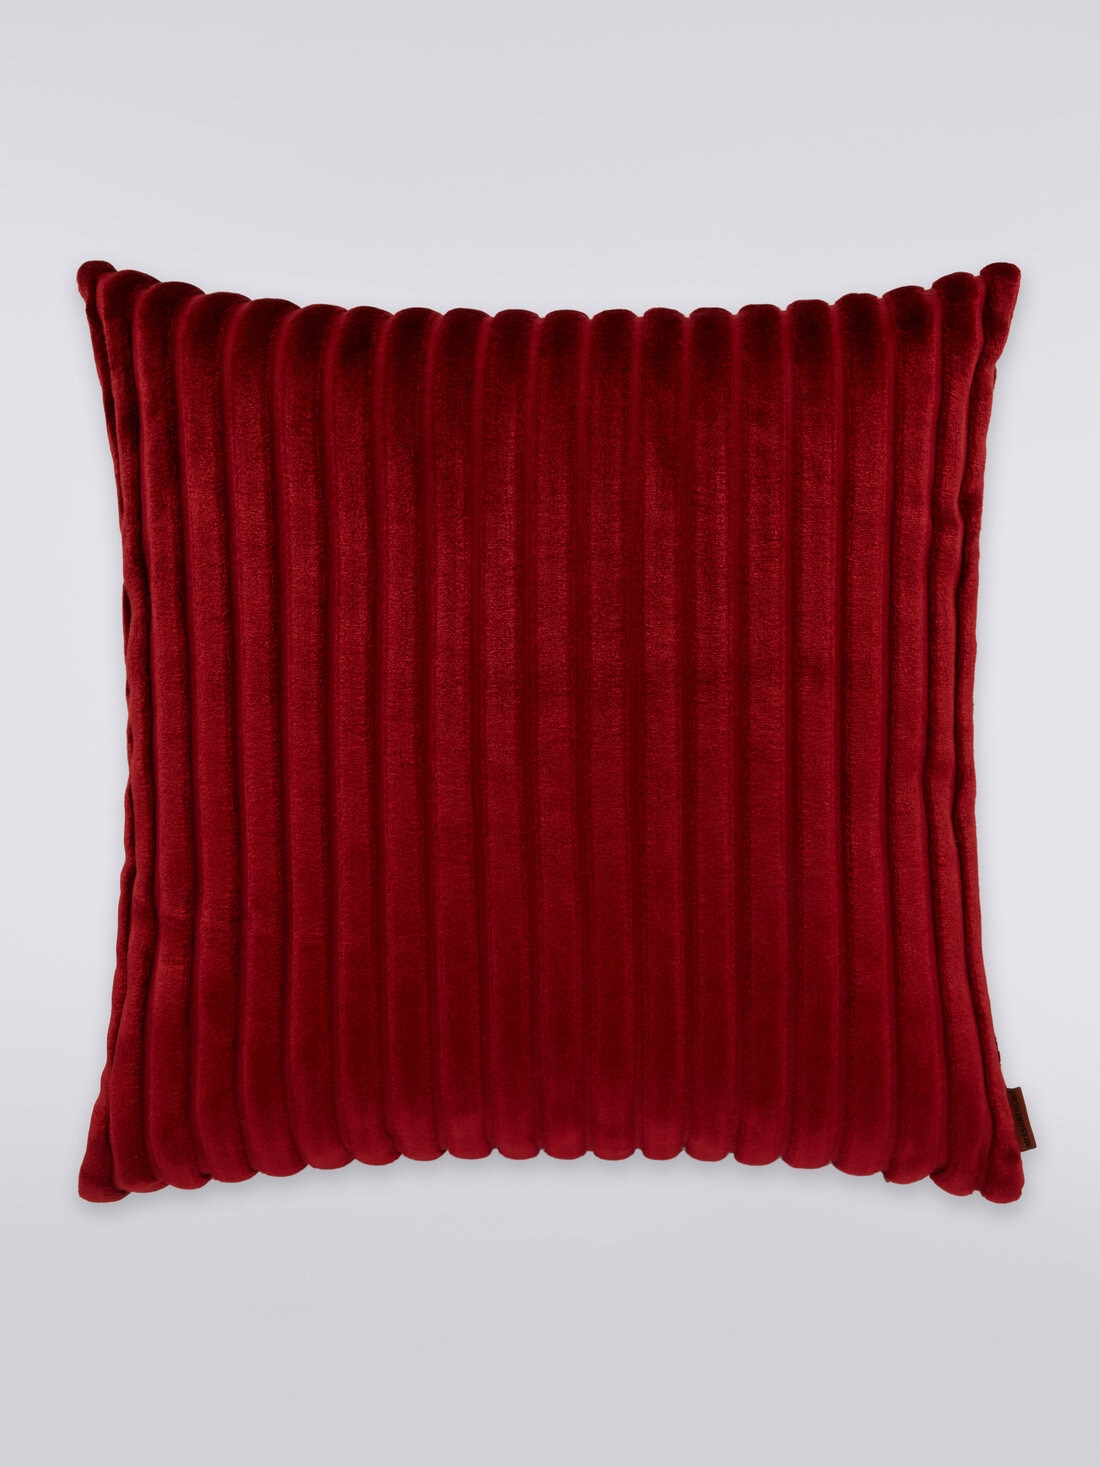 Coomba Coussin 40X40, Rouge  - 8033050653744 - 0